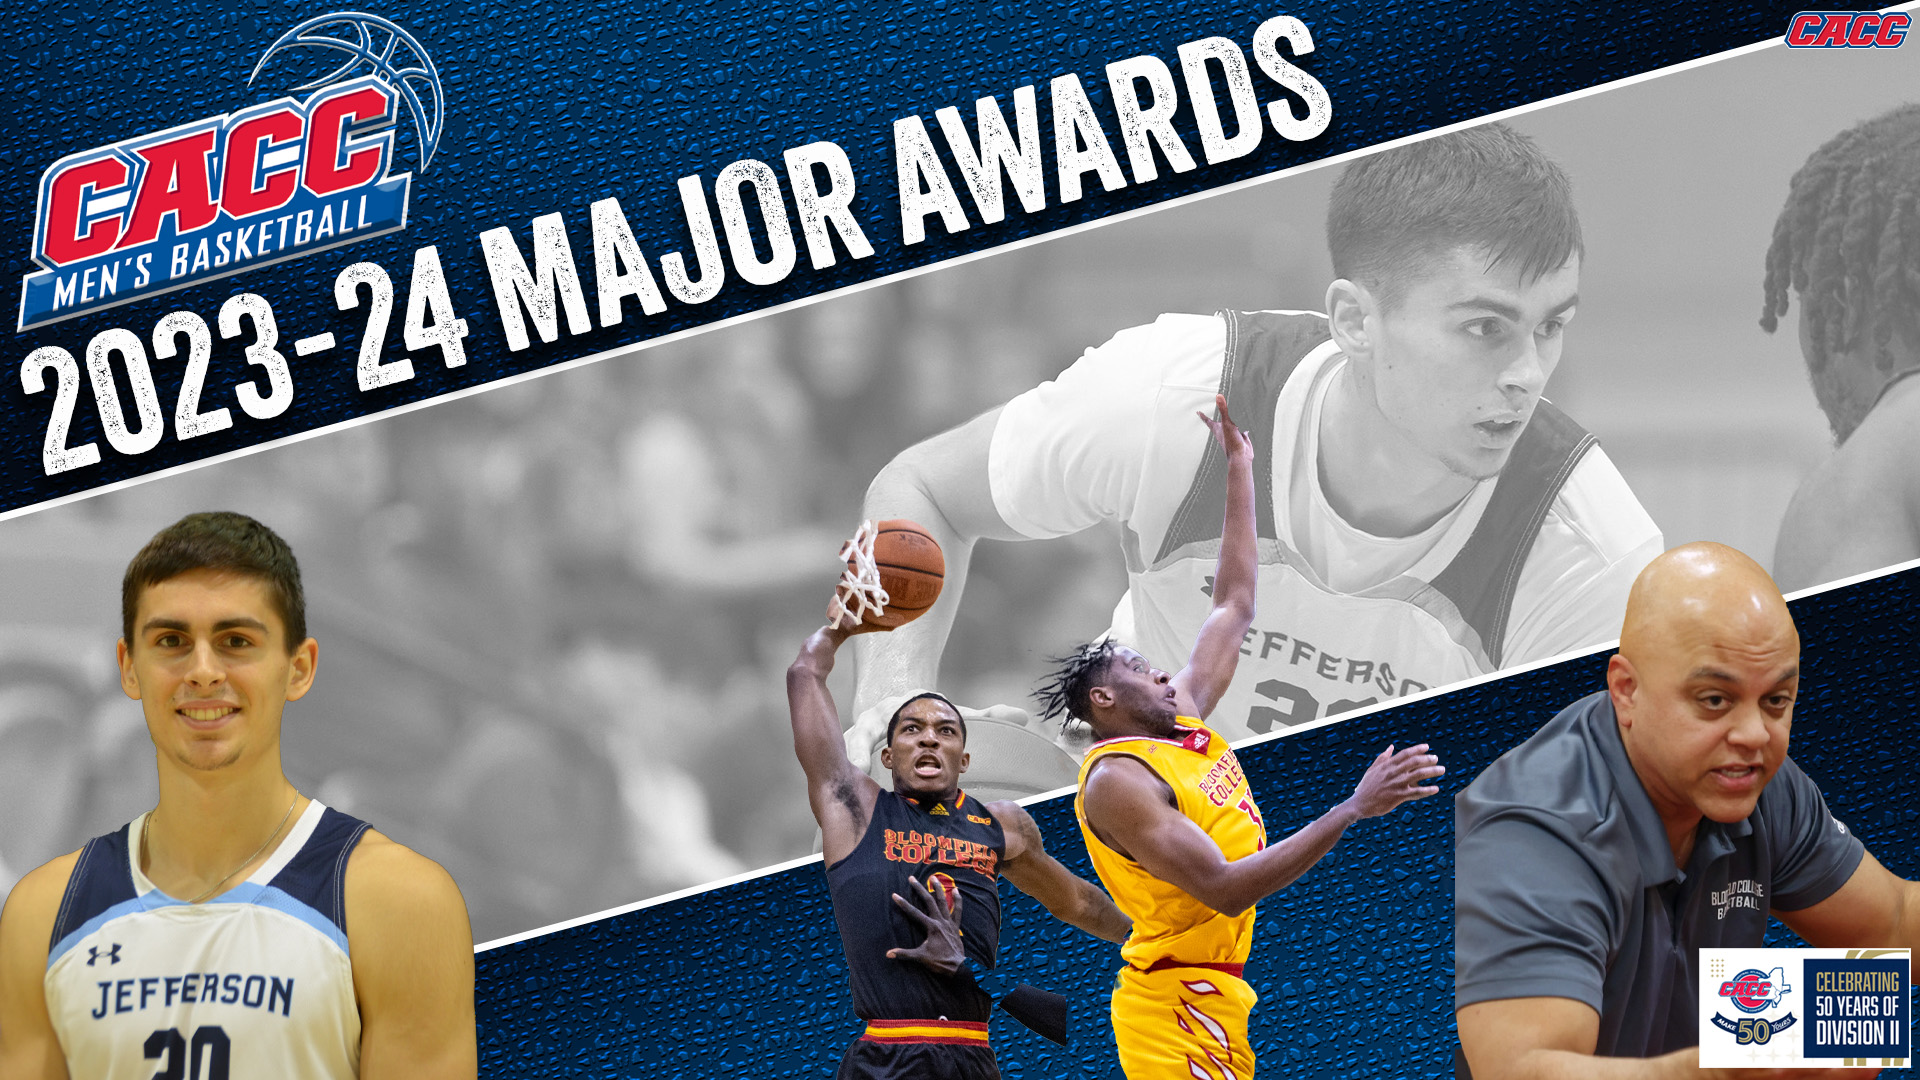 Erik Timko Earns 2nd-Straight CACC MBB POY Award; All-CACC Teams Announced